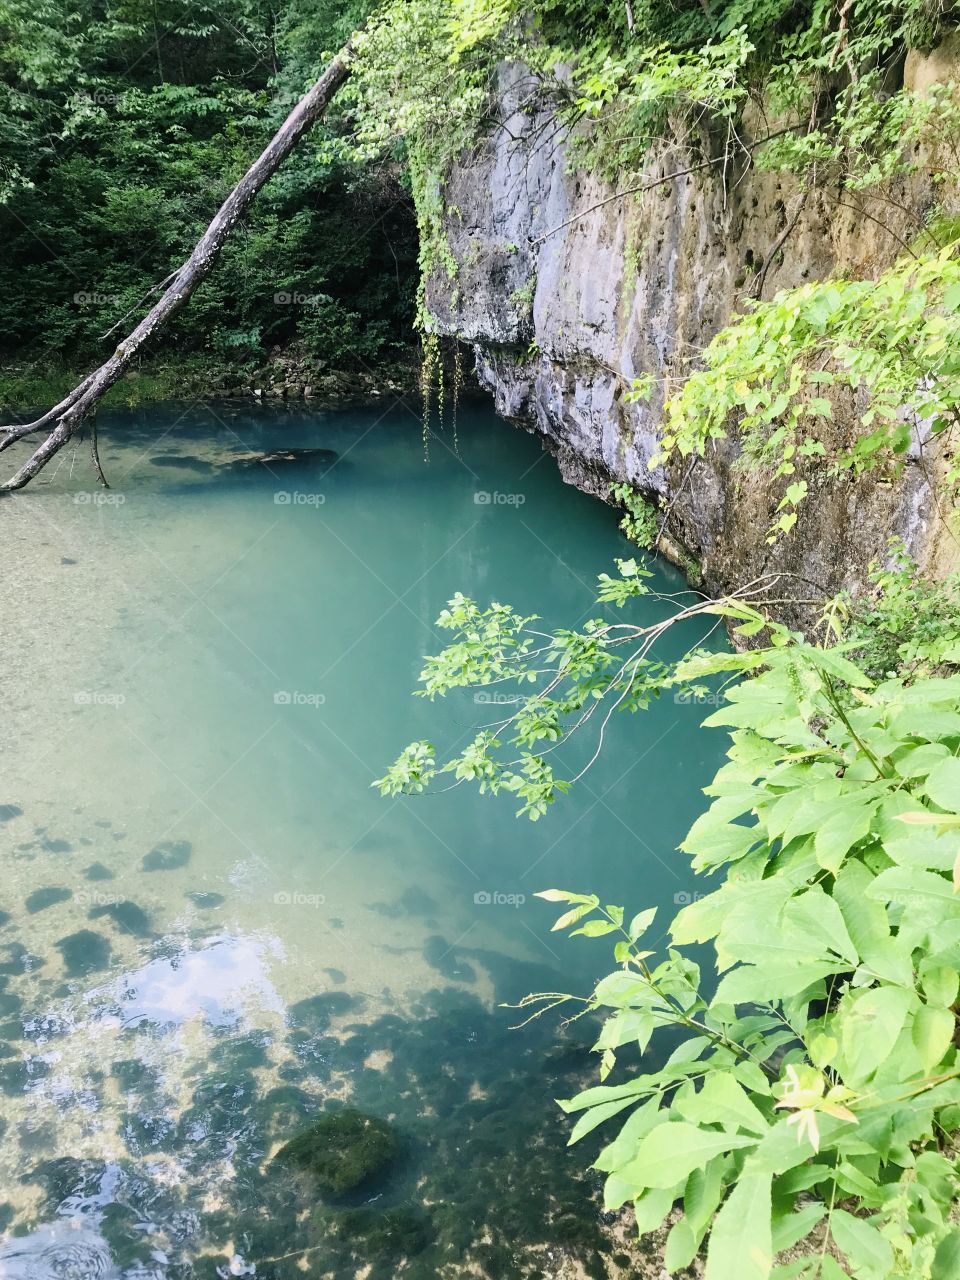 Gorgeous natural perfectly clear spring water in Ha Ha Tonka State Park in Missouri! 